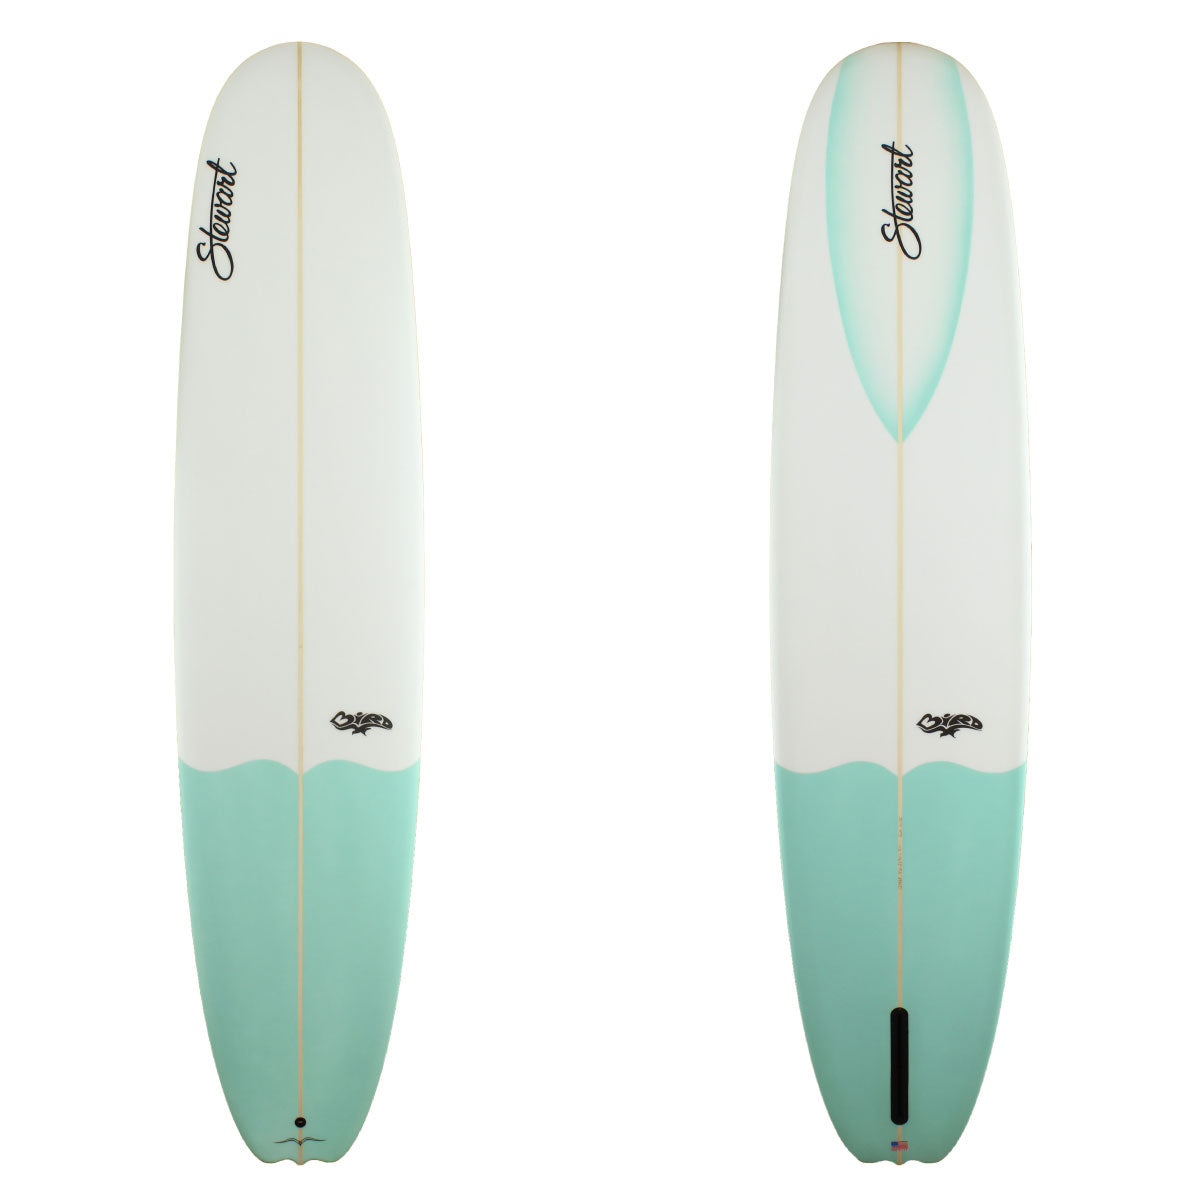 Deck and bottom view of a Stewart Bird Longboard with teal tail dip and highlight around the nose concave